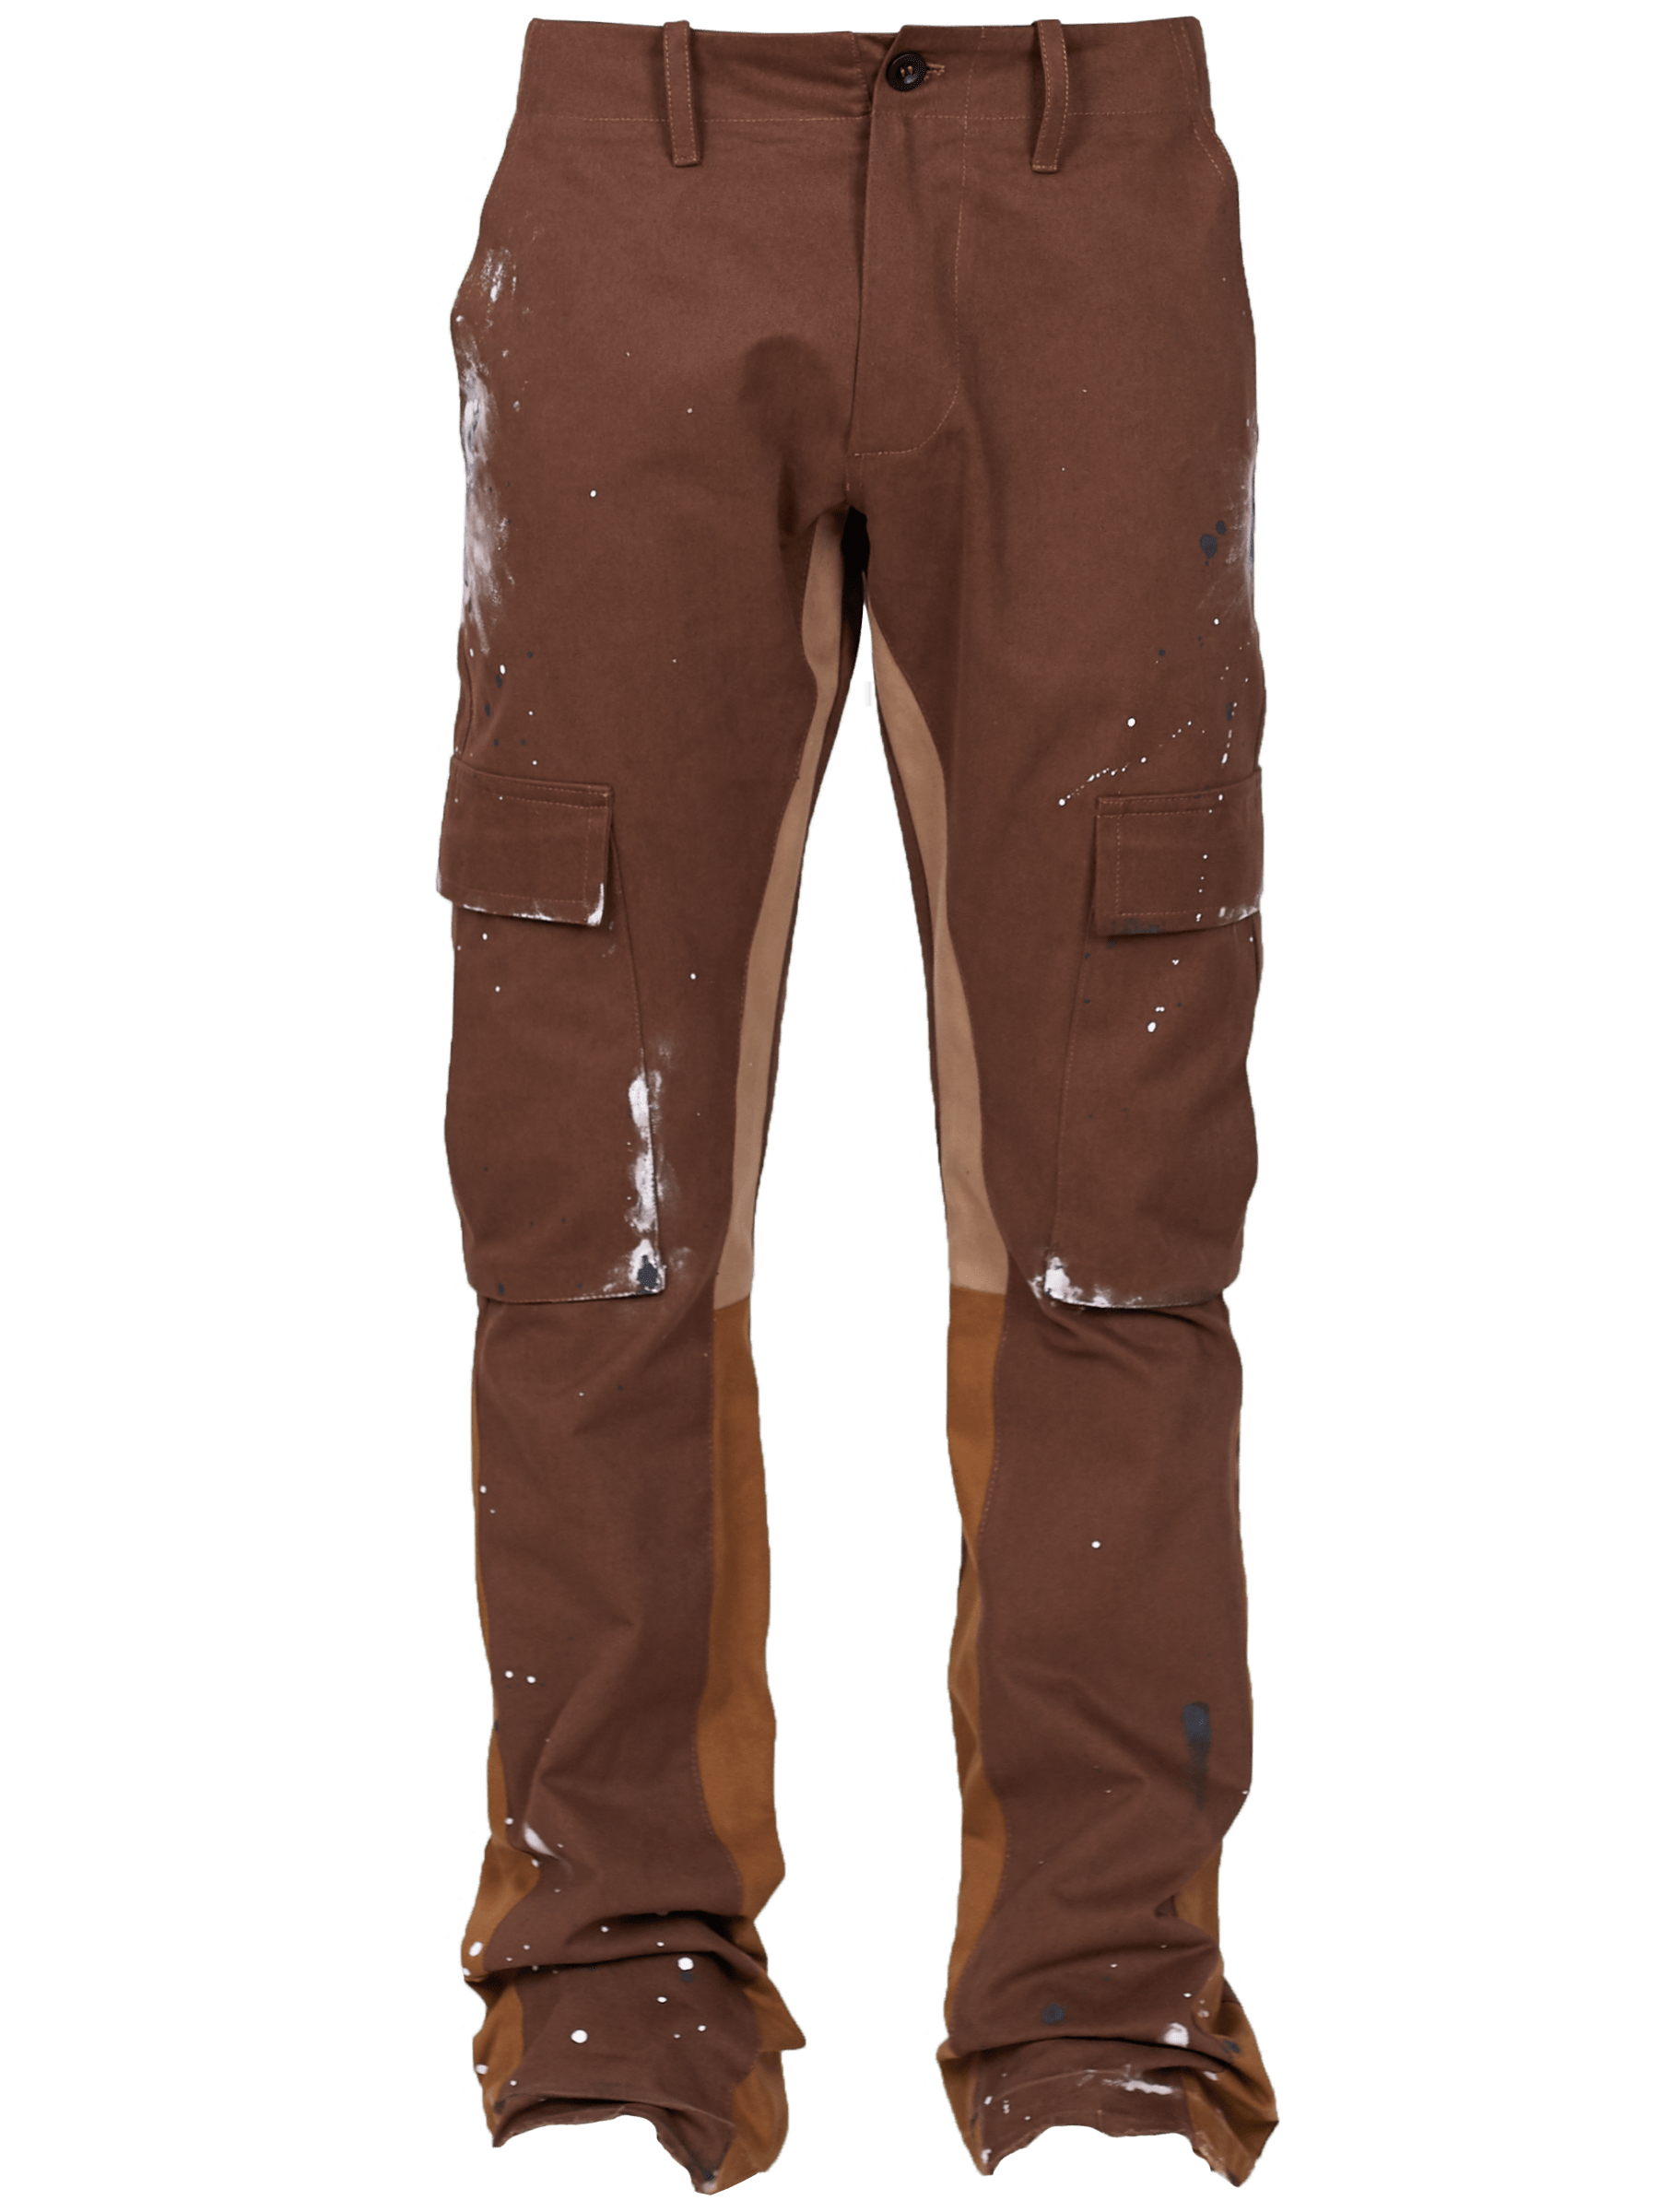 Flare Cargo Pants - Tobacco